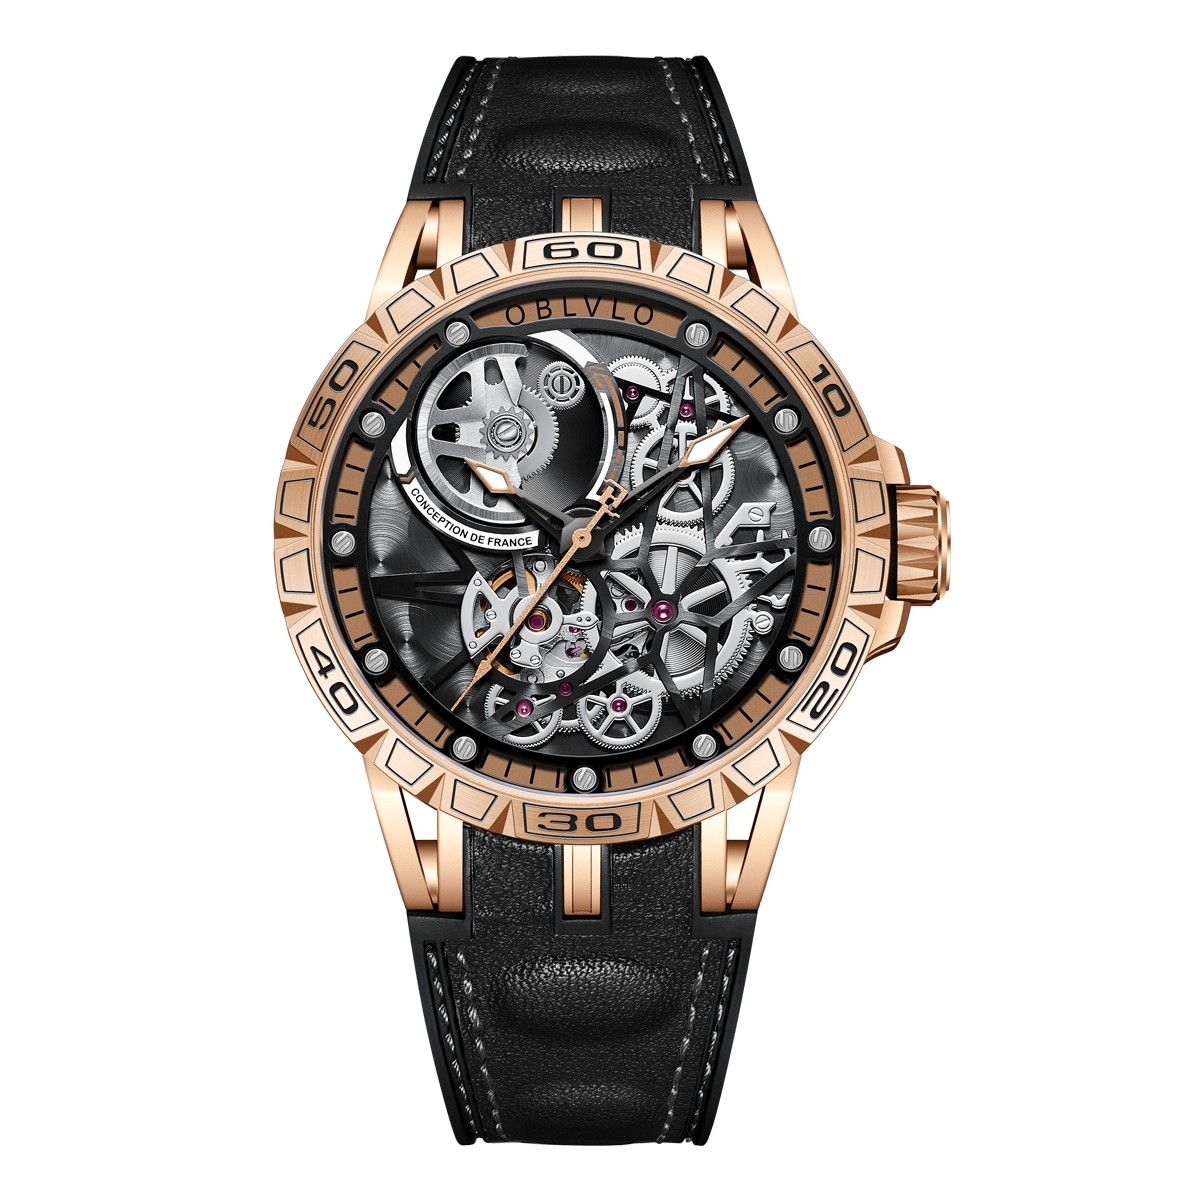 OBLVLO Sports Watch Skeleton Automatic Steel Watch for Men LM-PBB